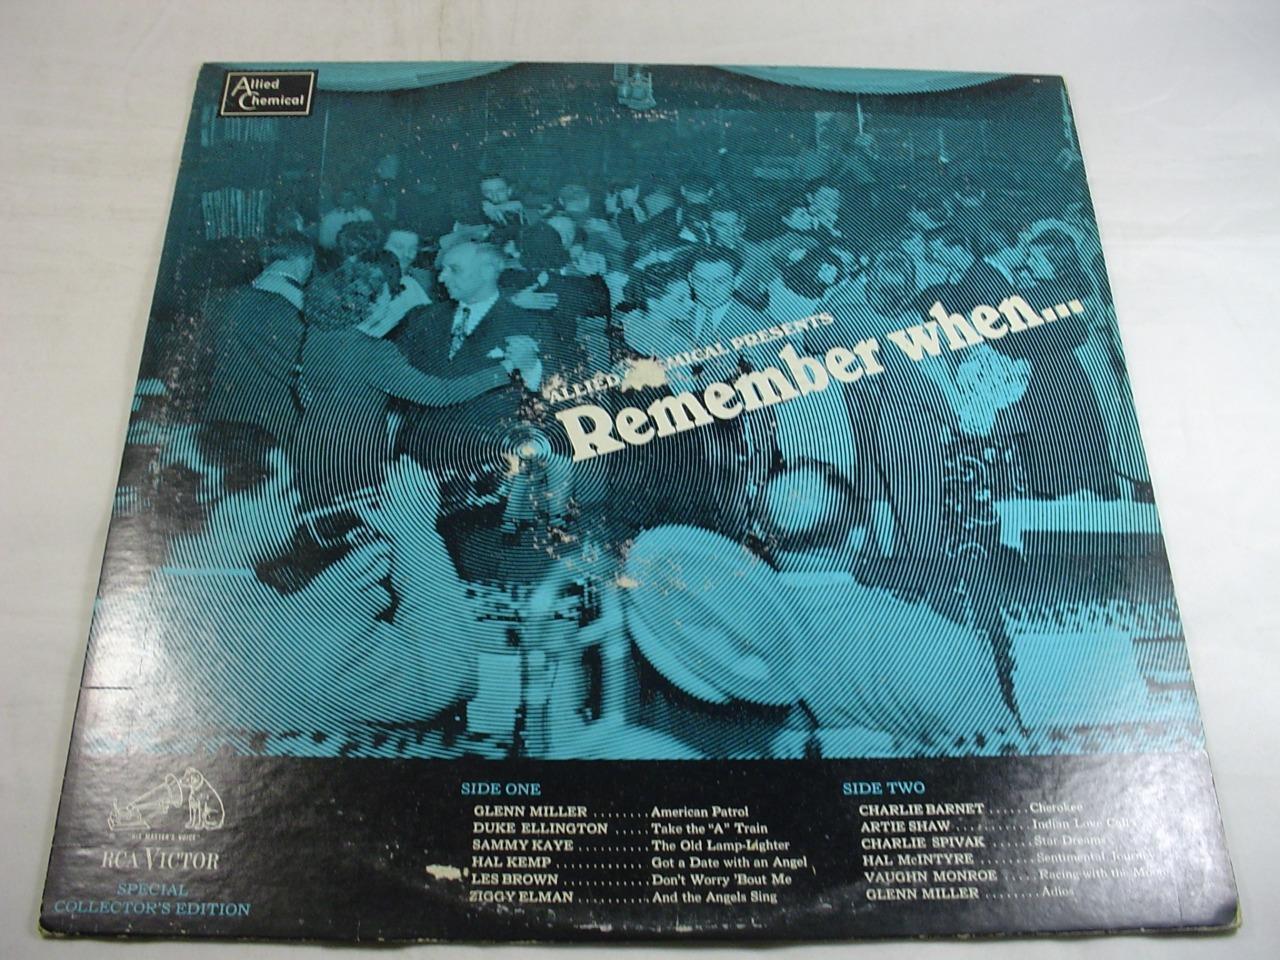 Allied Chemical Presents Remember When - RCA Victor PRM-244 Mono